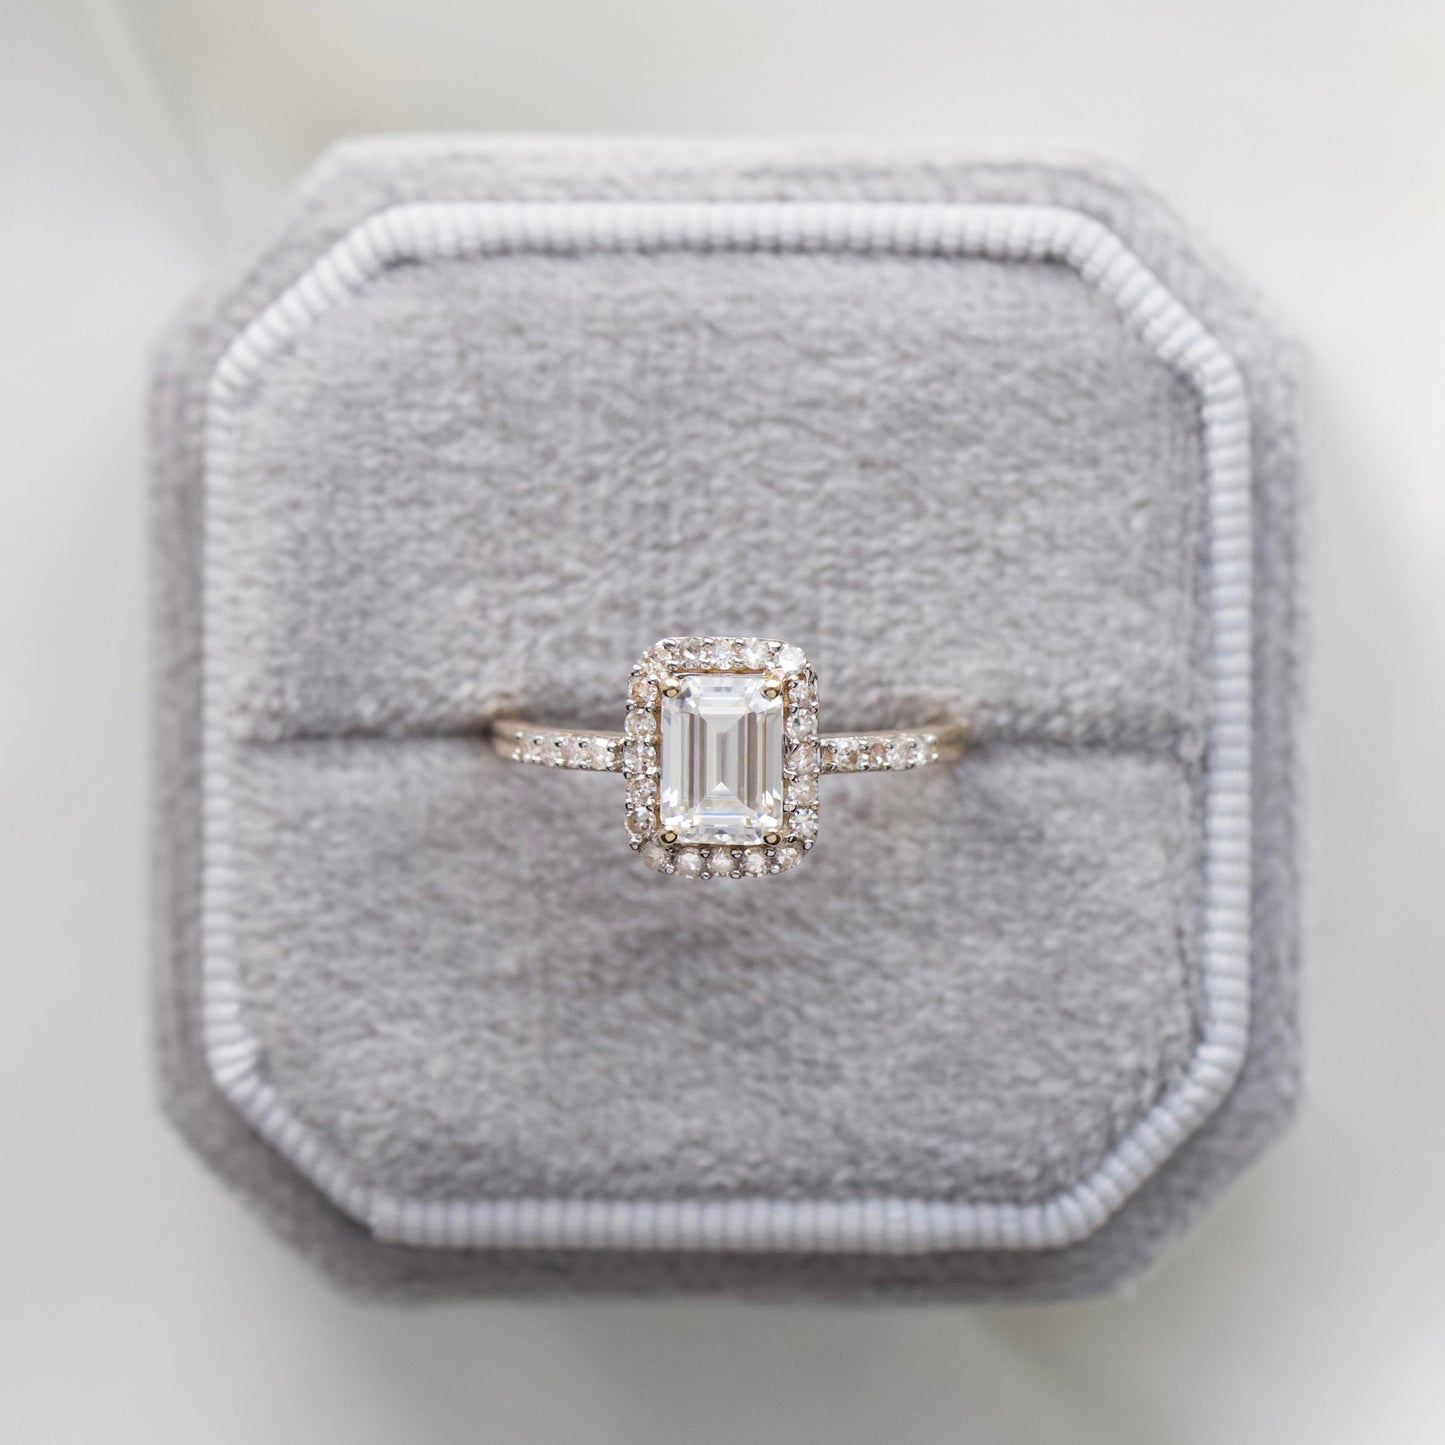 Carrie elizabeth Moissanite and diamond ring in 14k solid gold